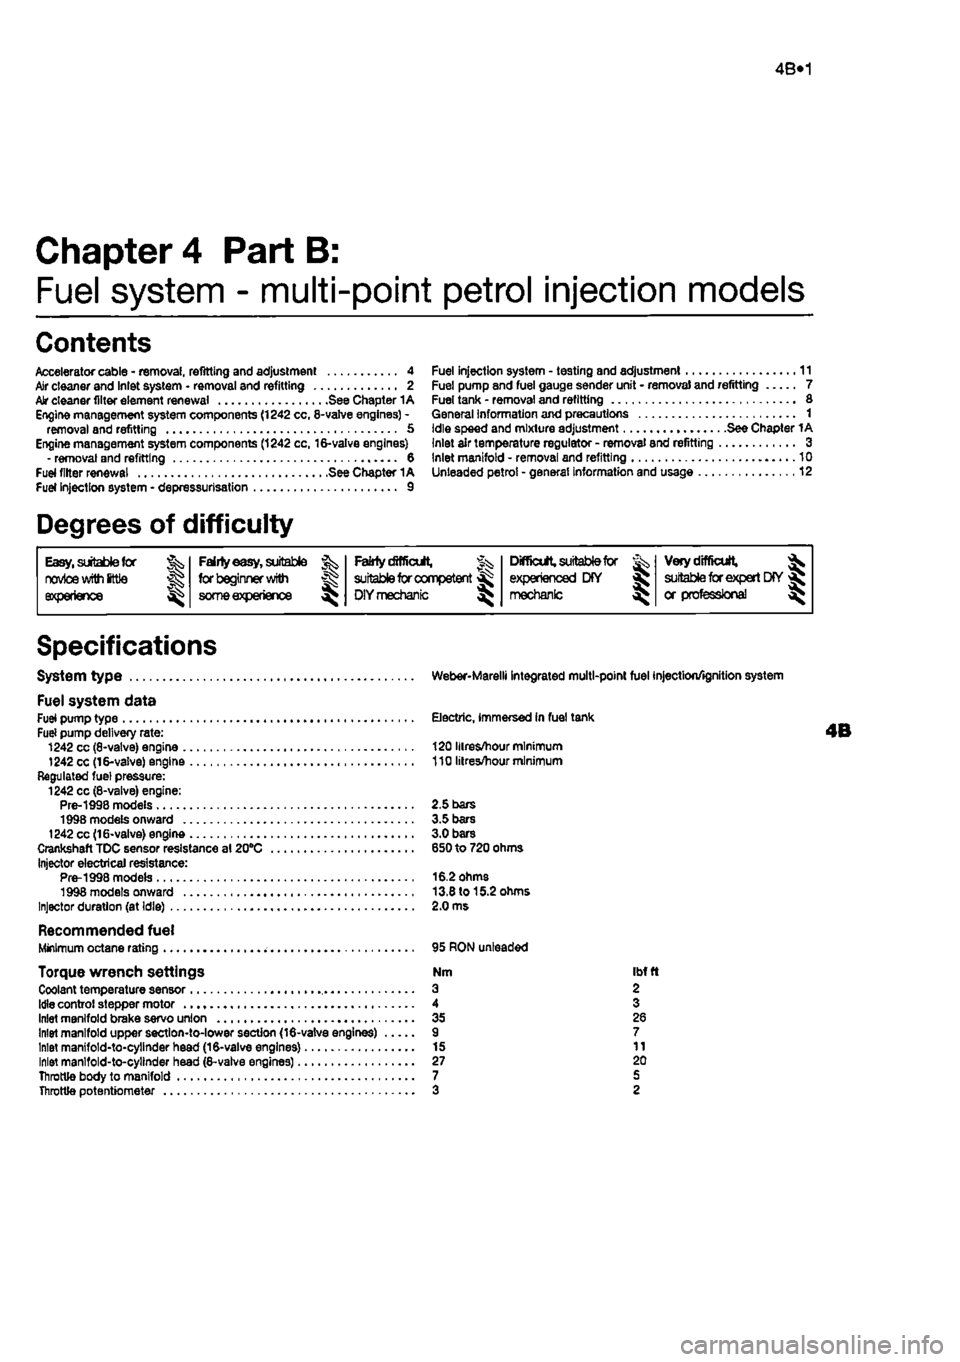 FIAT PUNTO 1999 176 / 1.G Workshop Manual 
4B*1 
Chapter 4 Part B: 
Fuel system - multi-point petrol injection models 
Contents 
Accelerator cable - removal, refitting and adjustment 4 Air cleaner and Inlet system • removal and refitting 2 